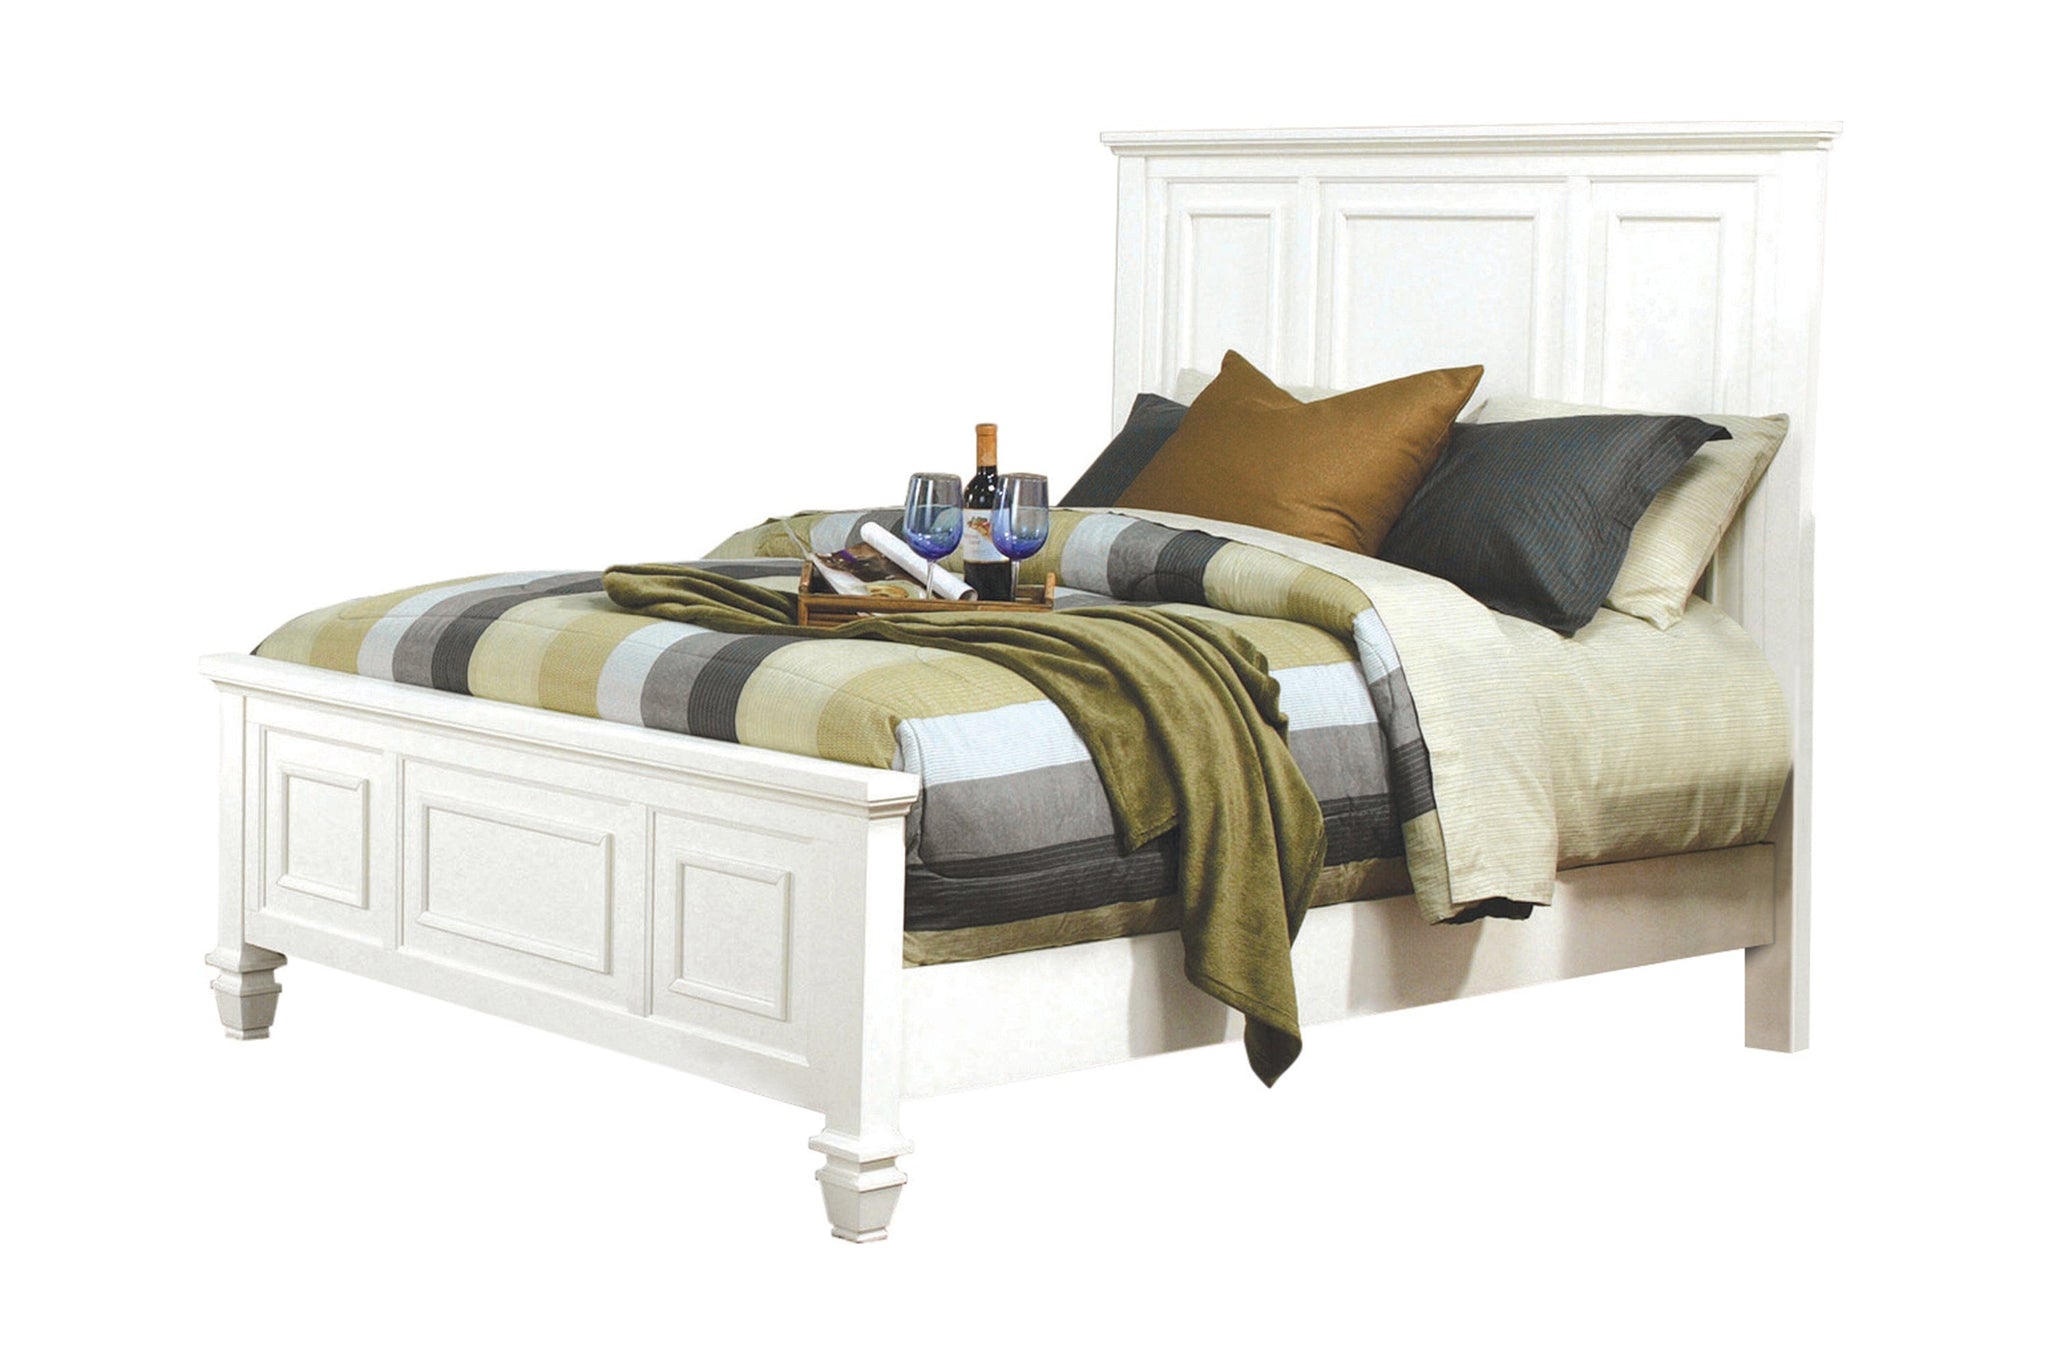 Sandy Beach Queen Panel Bed With High Headboard White Collection: Highlights A Master Beachfront Bedroom Or One With A Skyline View. SKU: 201301Q